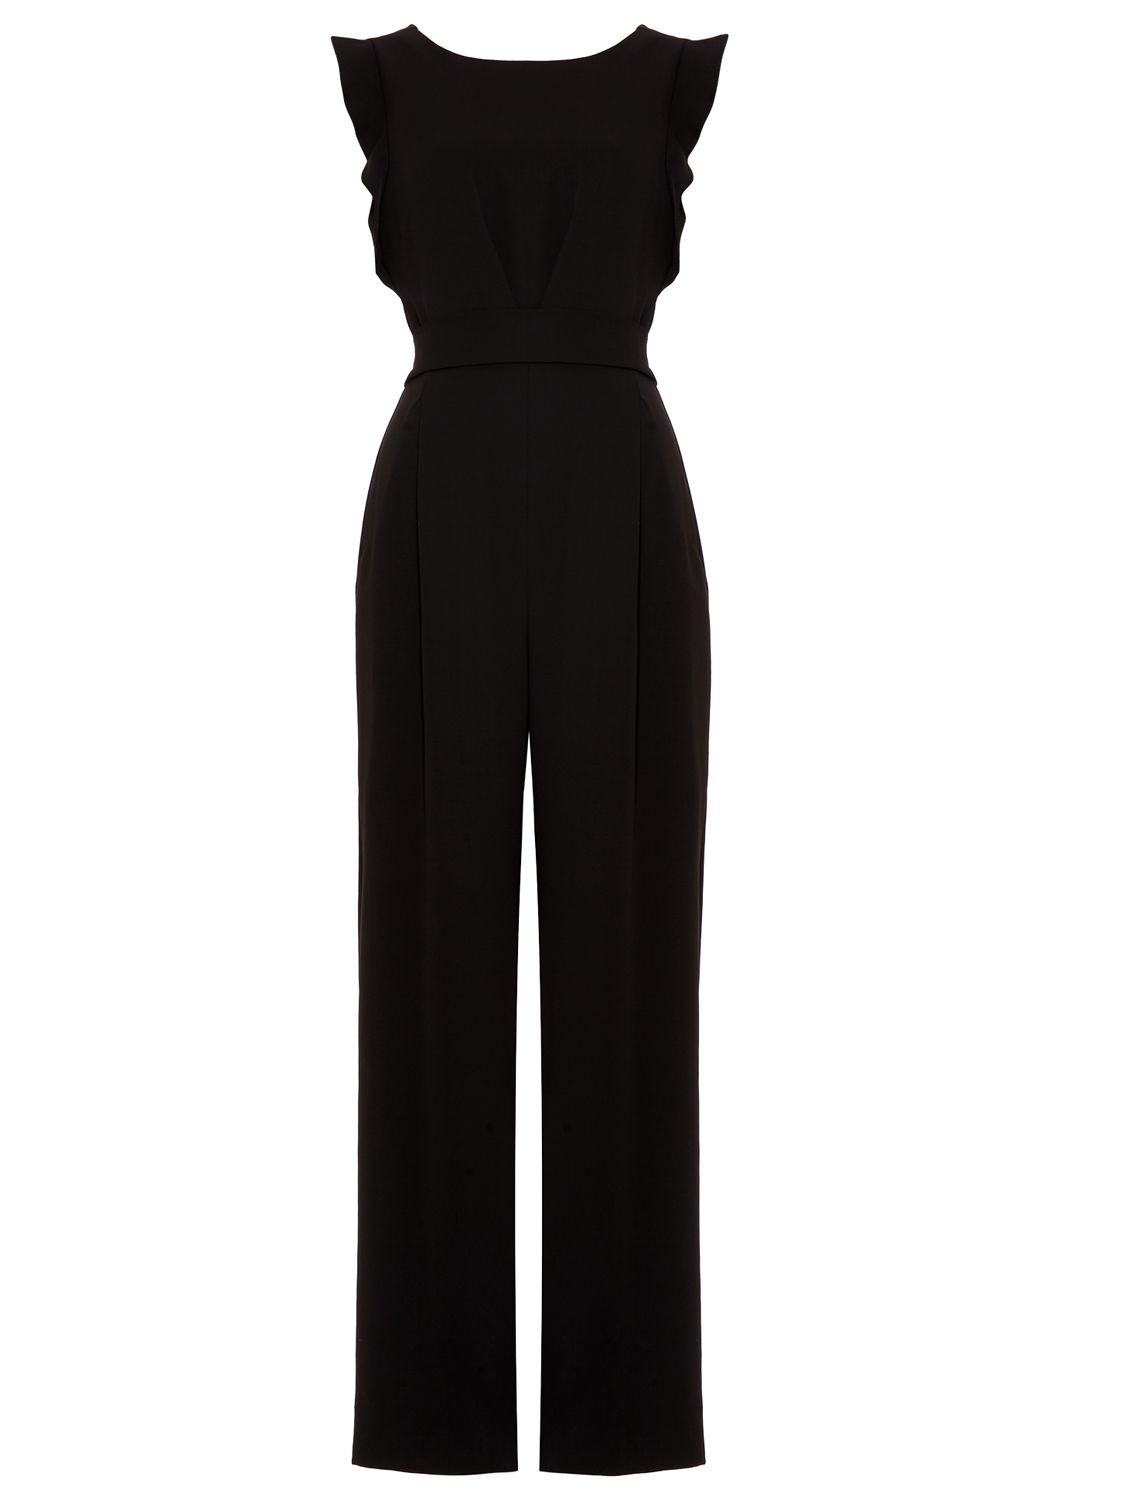 Phase Eight Victoriana Jumpsuit, Black at John Lewis & Partners